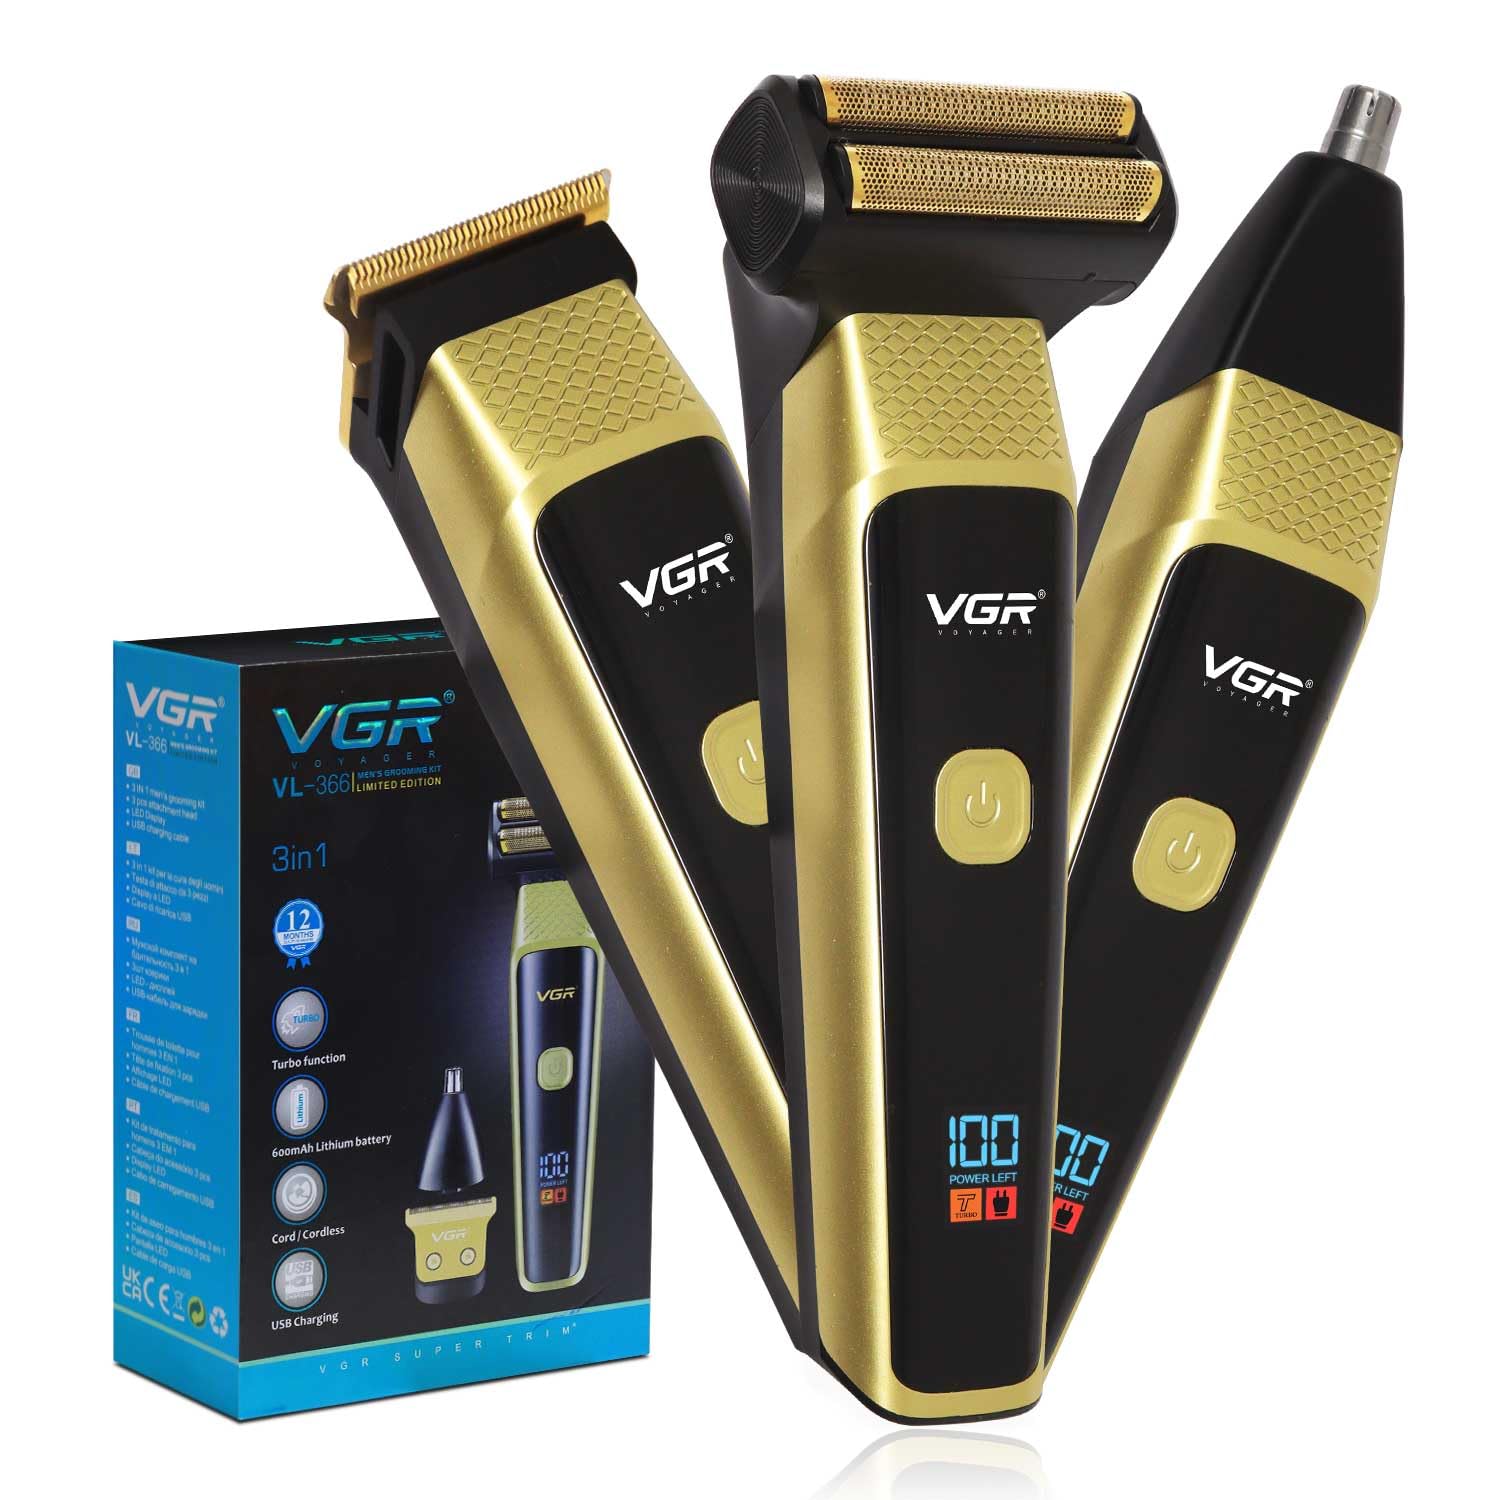 VGR VL-366 Limited Edition Professional 3 in 1 Grooming Kit, (Gold)